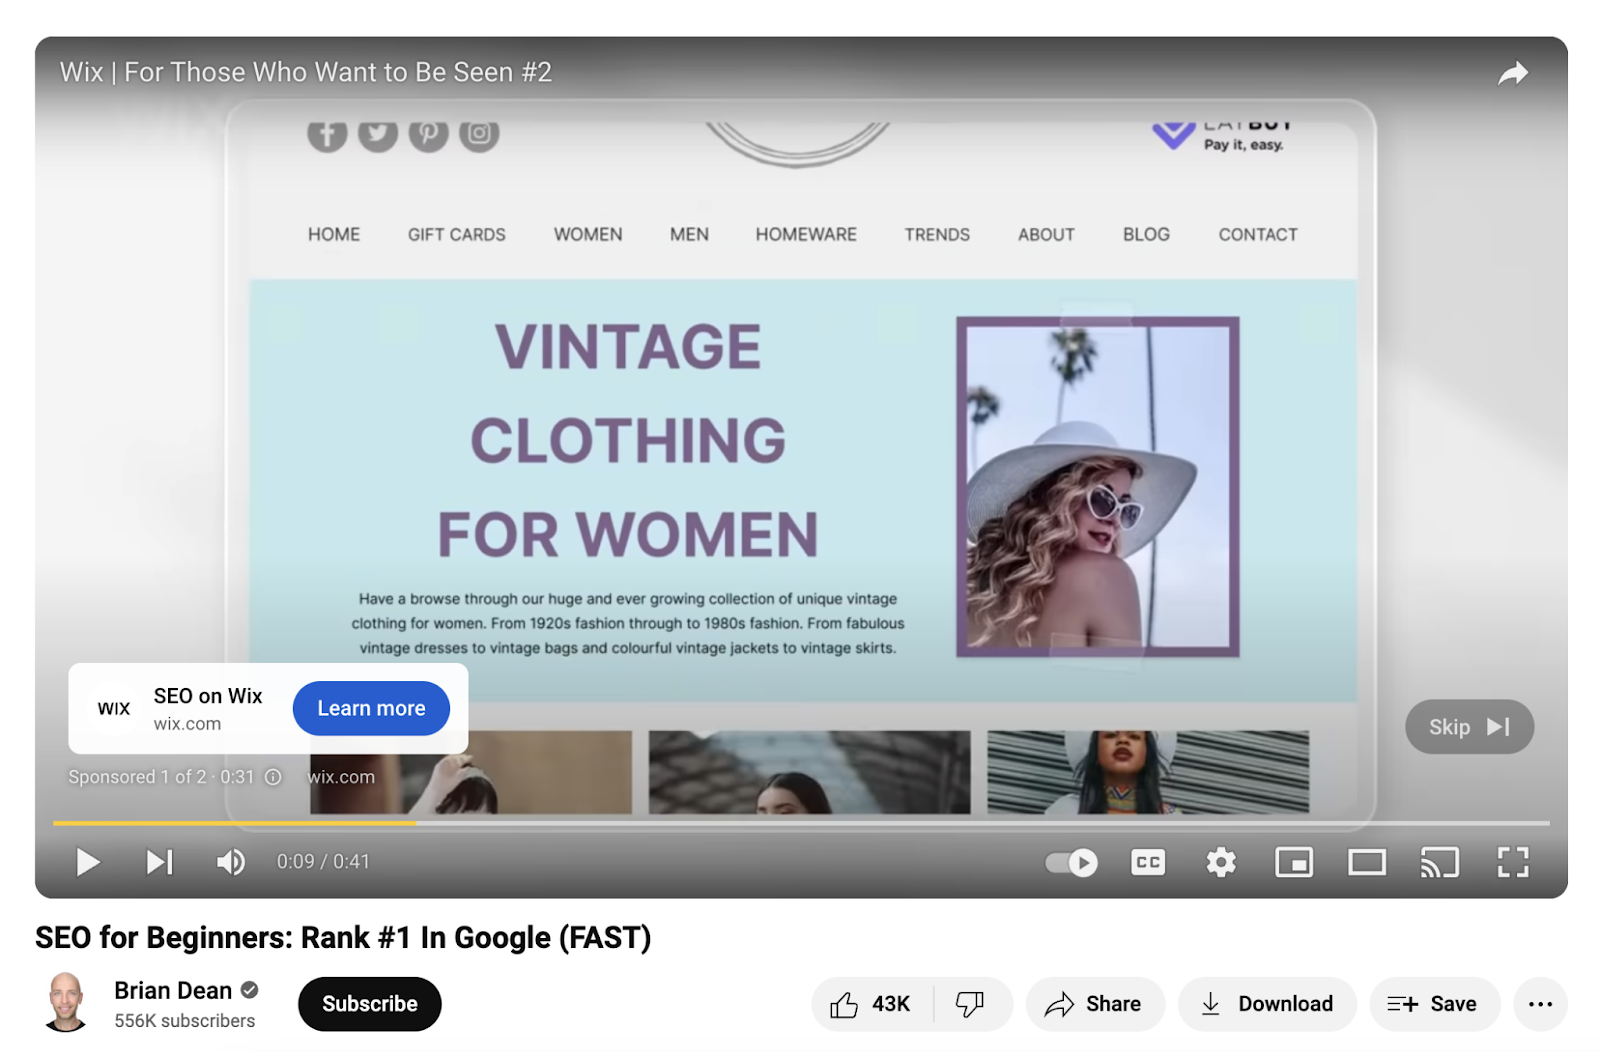 a seo on wix ad plays before an seo for beginners video on youtube